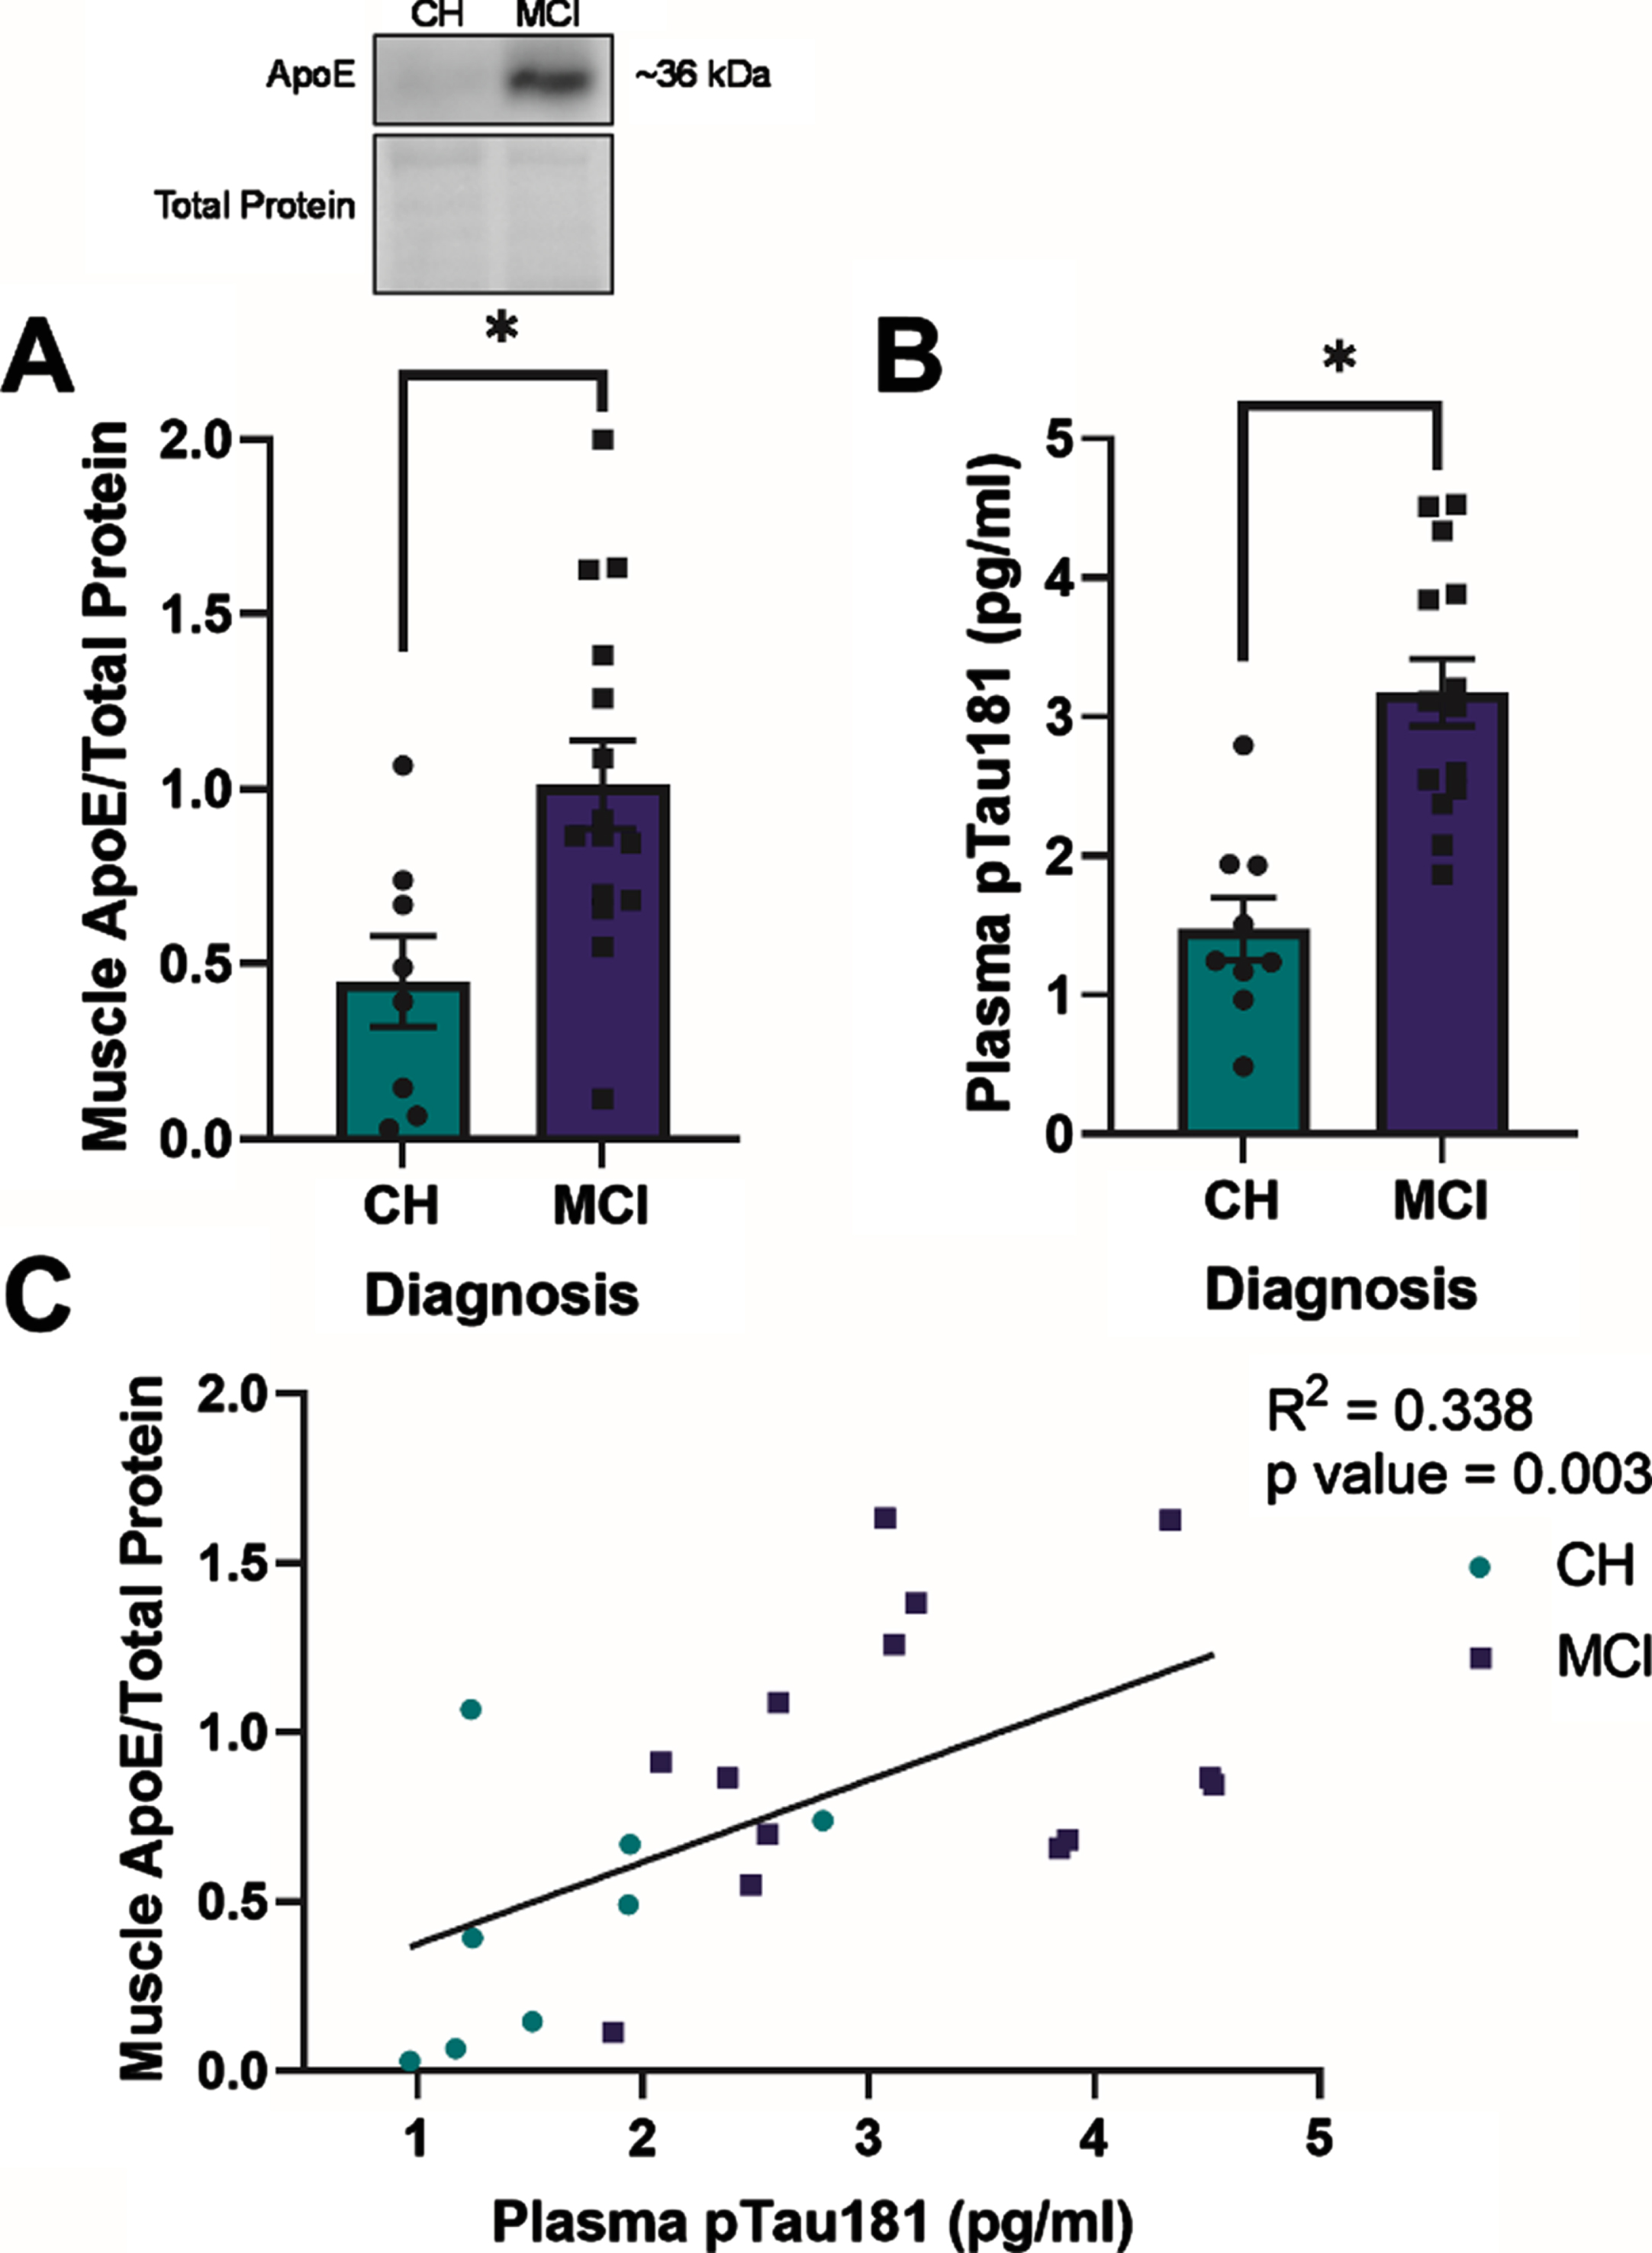 Apolipoprotein E (ApoE) expression in skeletal muscle and plasma phosphorylated tau181 (pTau181) expression are elevated in apolipoprotein ɛ4 (APOE4) carriers with mild cognitive impairment (MCI) and are positively correlated in all APOE4 carriers. Mean muscle ApoE±standard error measured by Western blot in relationship to diagnostic status (A). Plasma pTau181±standard error measured by Simoa-HDX immunoassay in relationship to diagnostic status (B). ApoE muscle content in relationship to plasma pTau181 levels (C). CH, cognitively healthy older adults; MCI, mild cognitive impairment. CH APOE4 carriers (n = 8-9), MCI APOE4 carriers (n = 14-15). *p < 0.001.